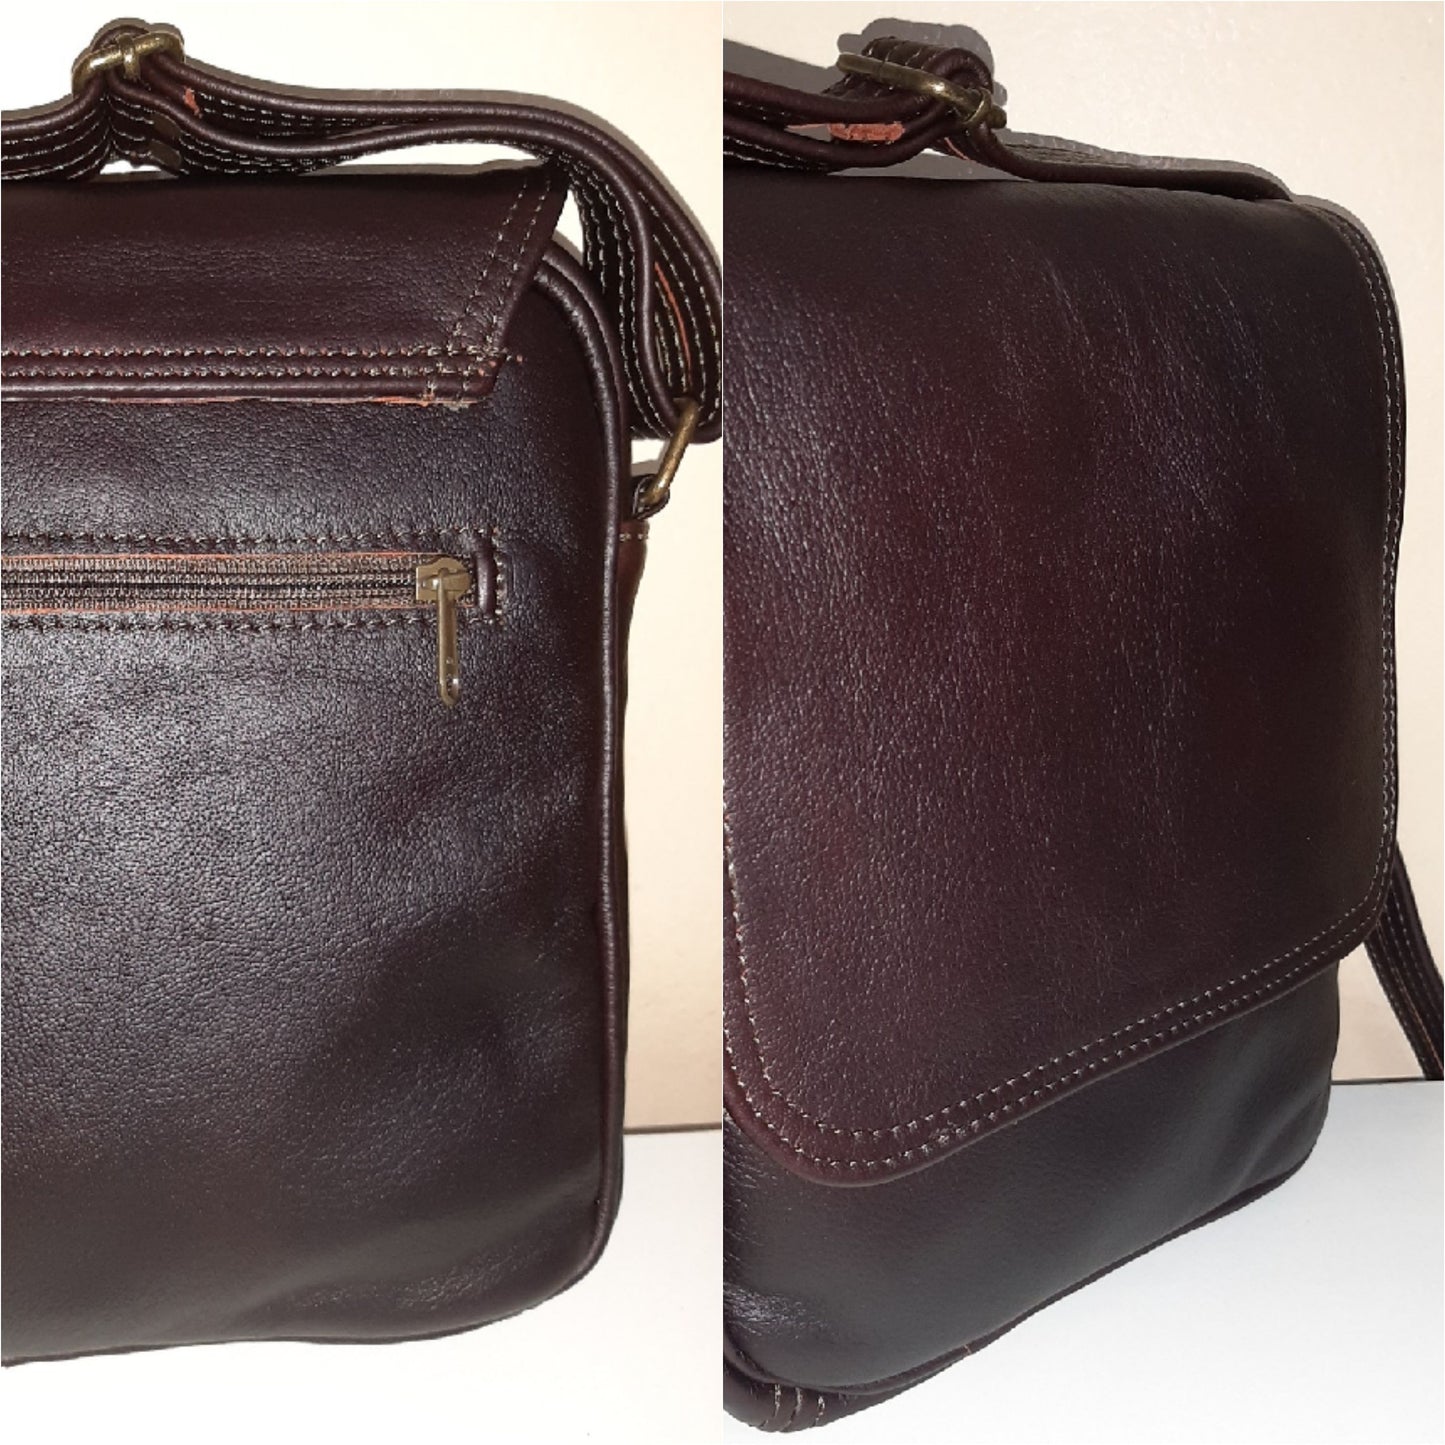 messenger bag with flap - cape Masai Leather